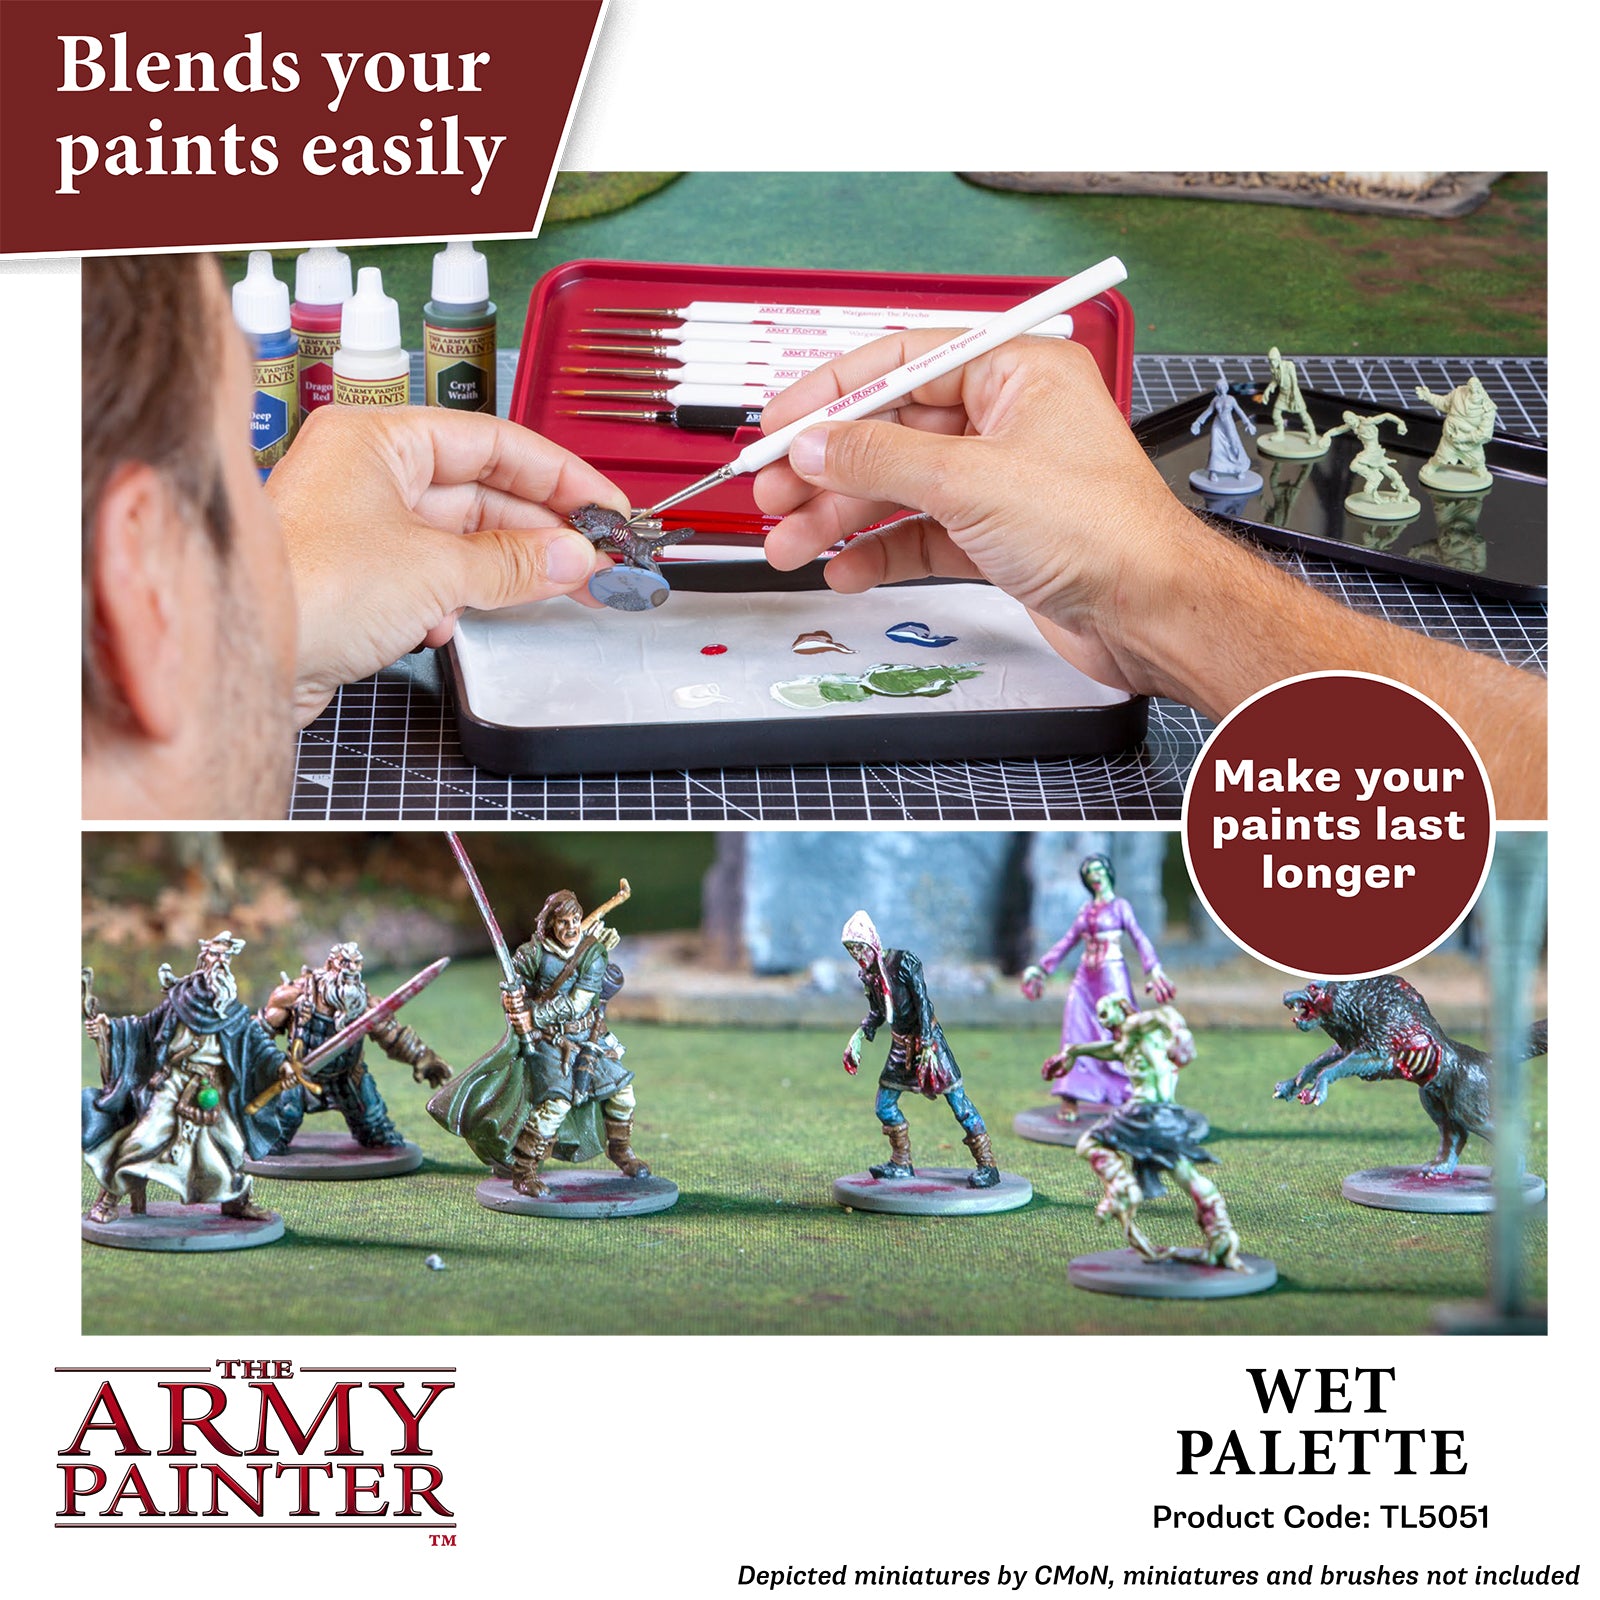 The Army Painter - The Army Painter Wet Palette has become a hobby staple  in the short time that it's been available. It's time for a re-stock of  your Hydro Sheets and